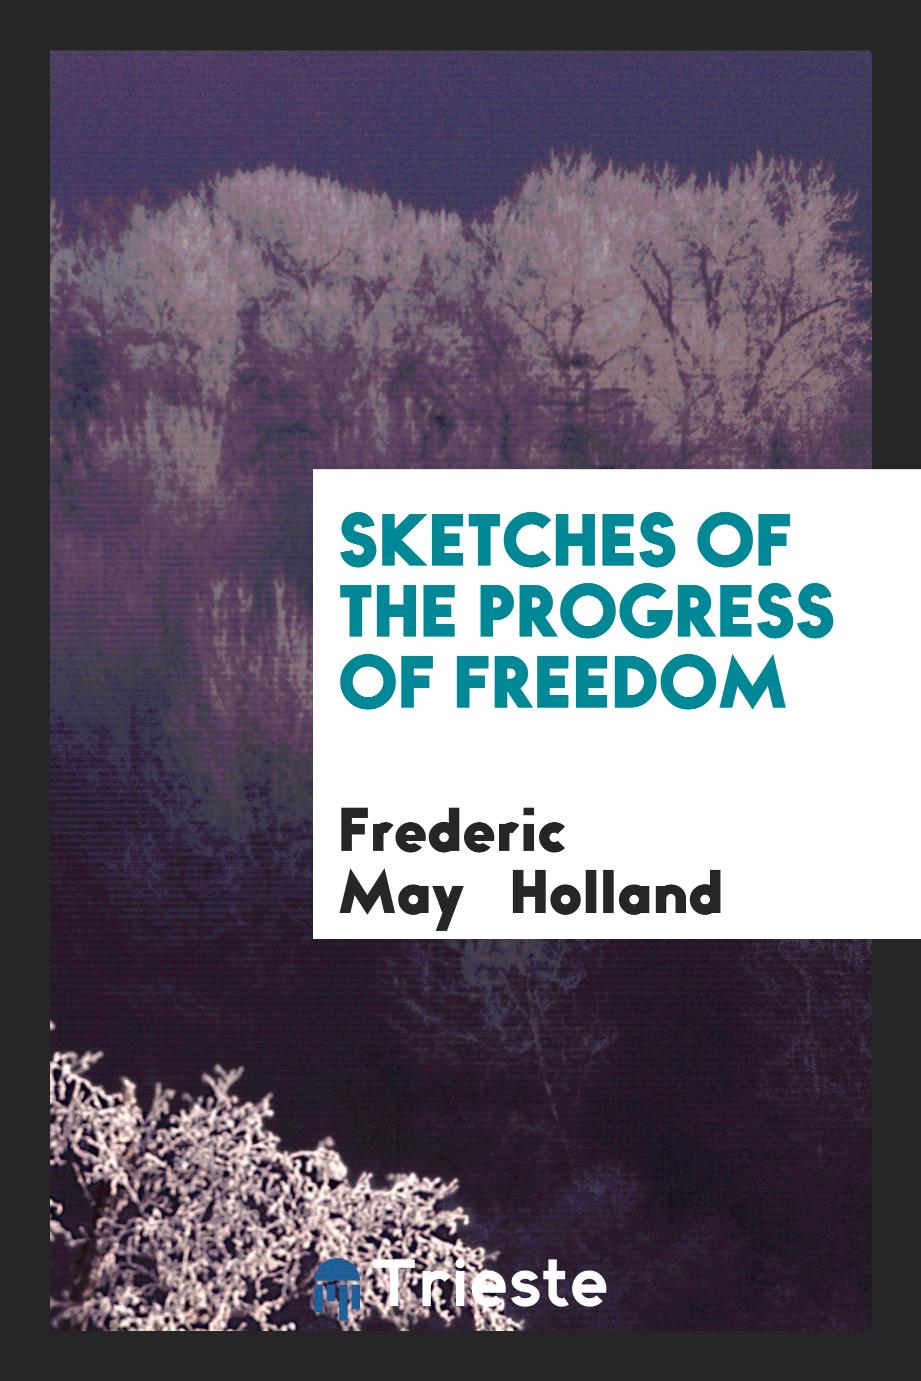 Sketches of the Progress of Freedom